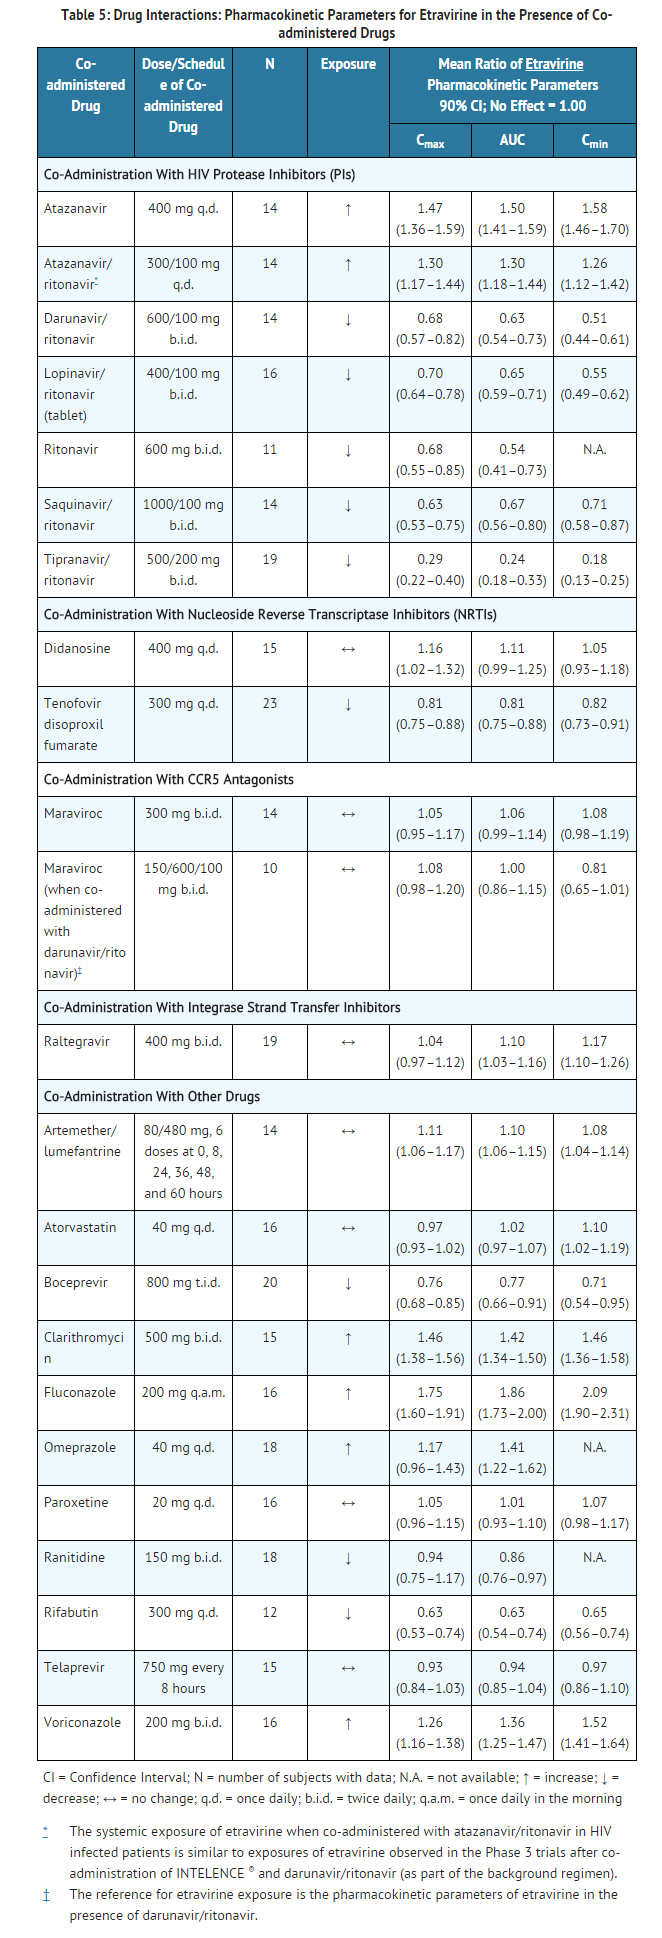 File:Etravine table5.png